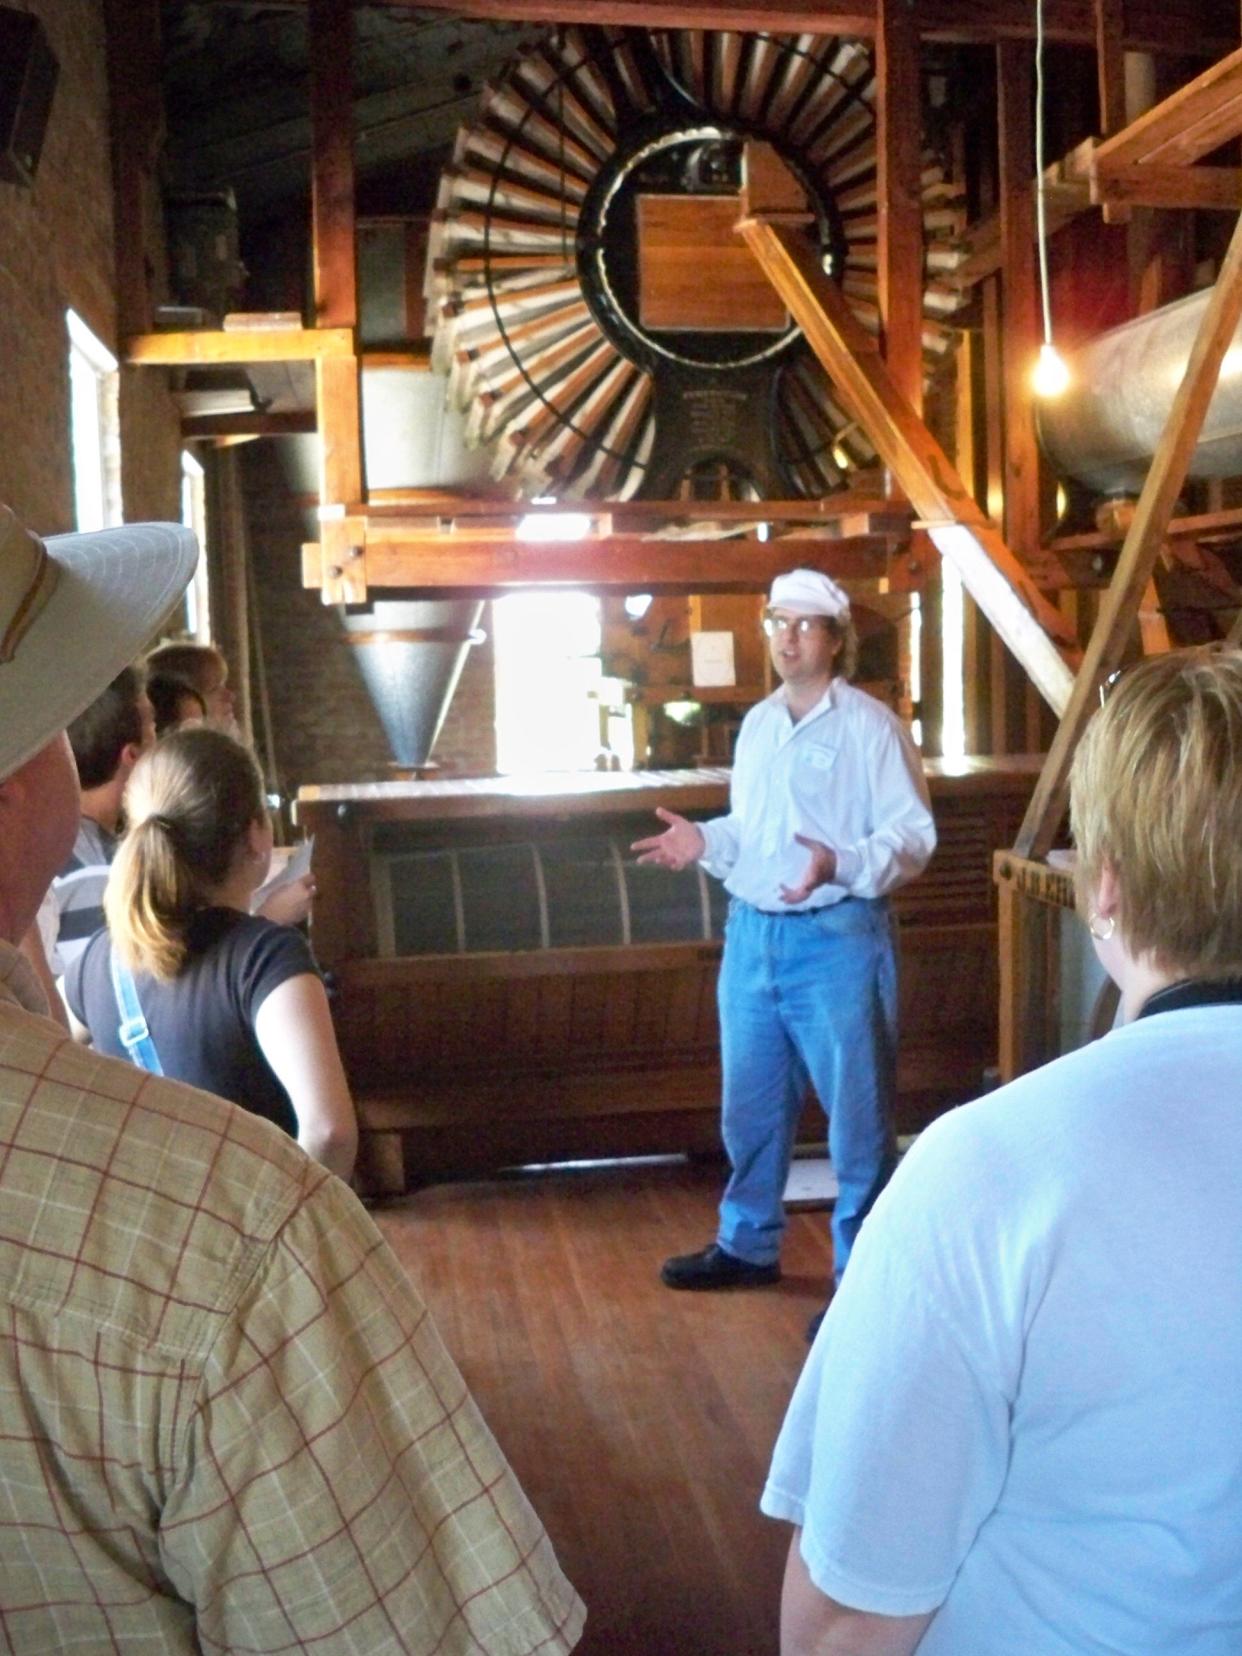 A miller speaks about the workings of the Old Mill in Lindsborg. The historic flour mill at the Lindsborg Old Mill and Swedish Heritage Museum will be running Saturday as part of the museum's Millfest events.